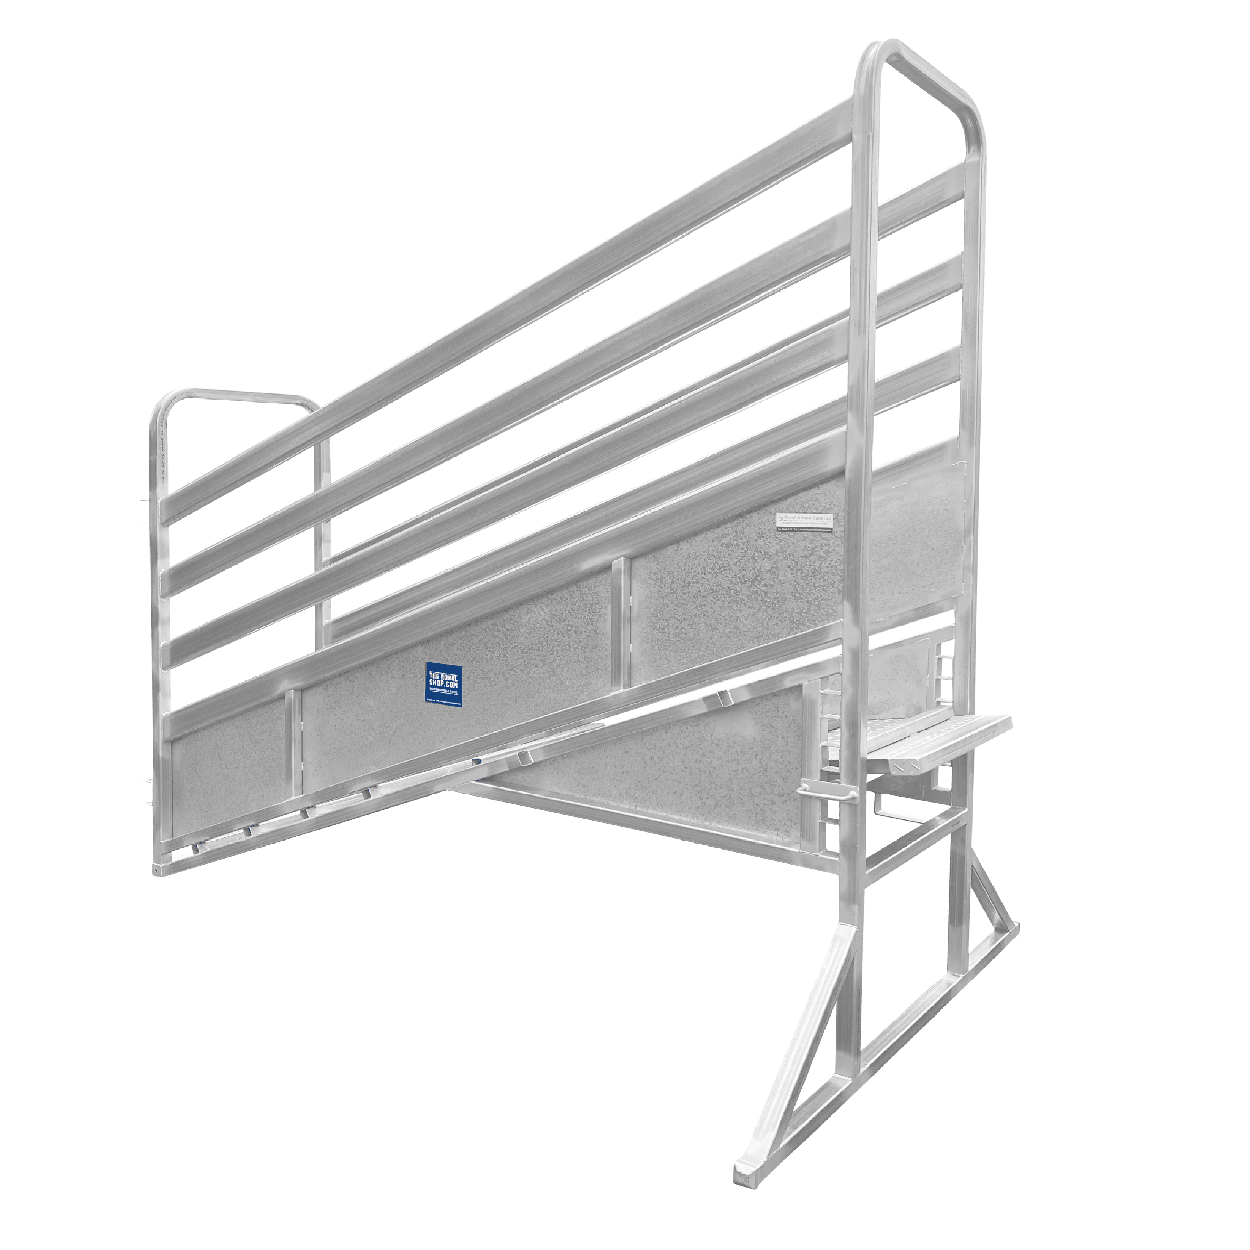 3m Adjustable Height Loading Ramp with adjustable range from 650mm to 1200mm. Includes 3mm Galvanised steel floor, gentle slope for efficient loading. Suitable for cattle, sheep and goats.